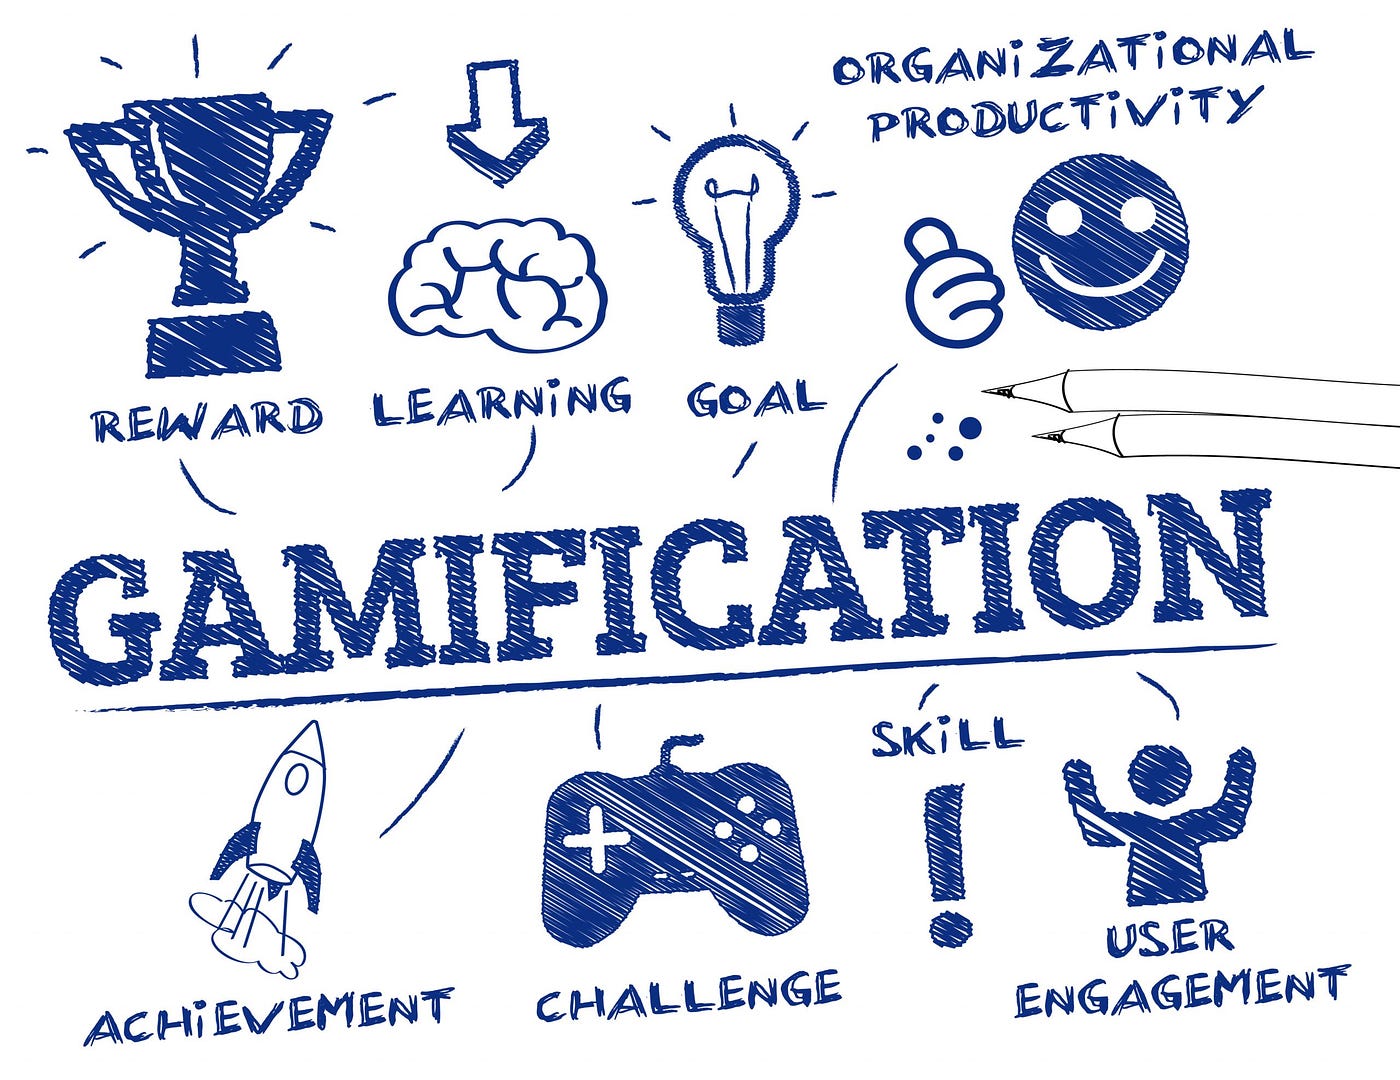 Smartico's Gamification Tools